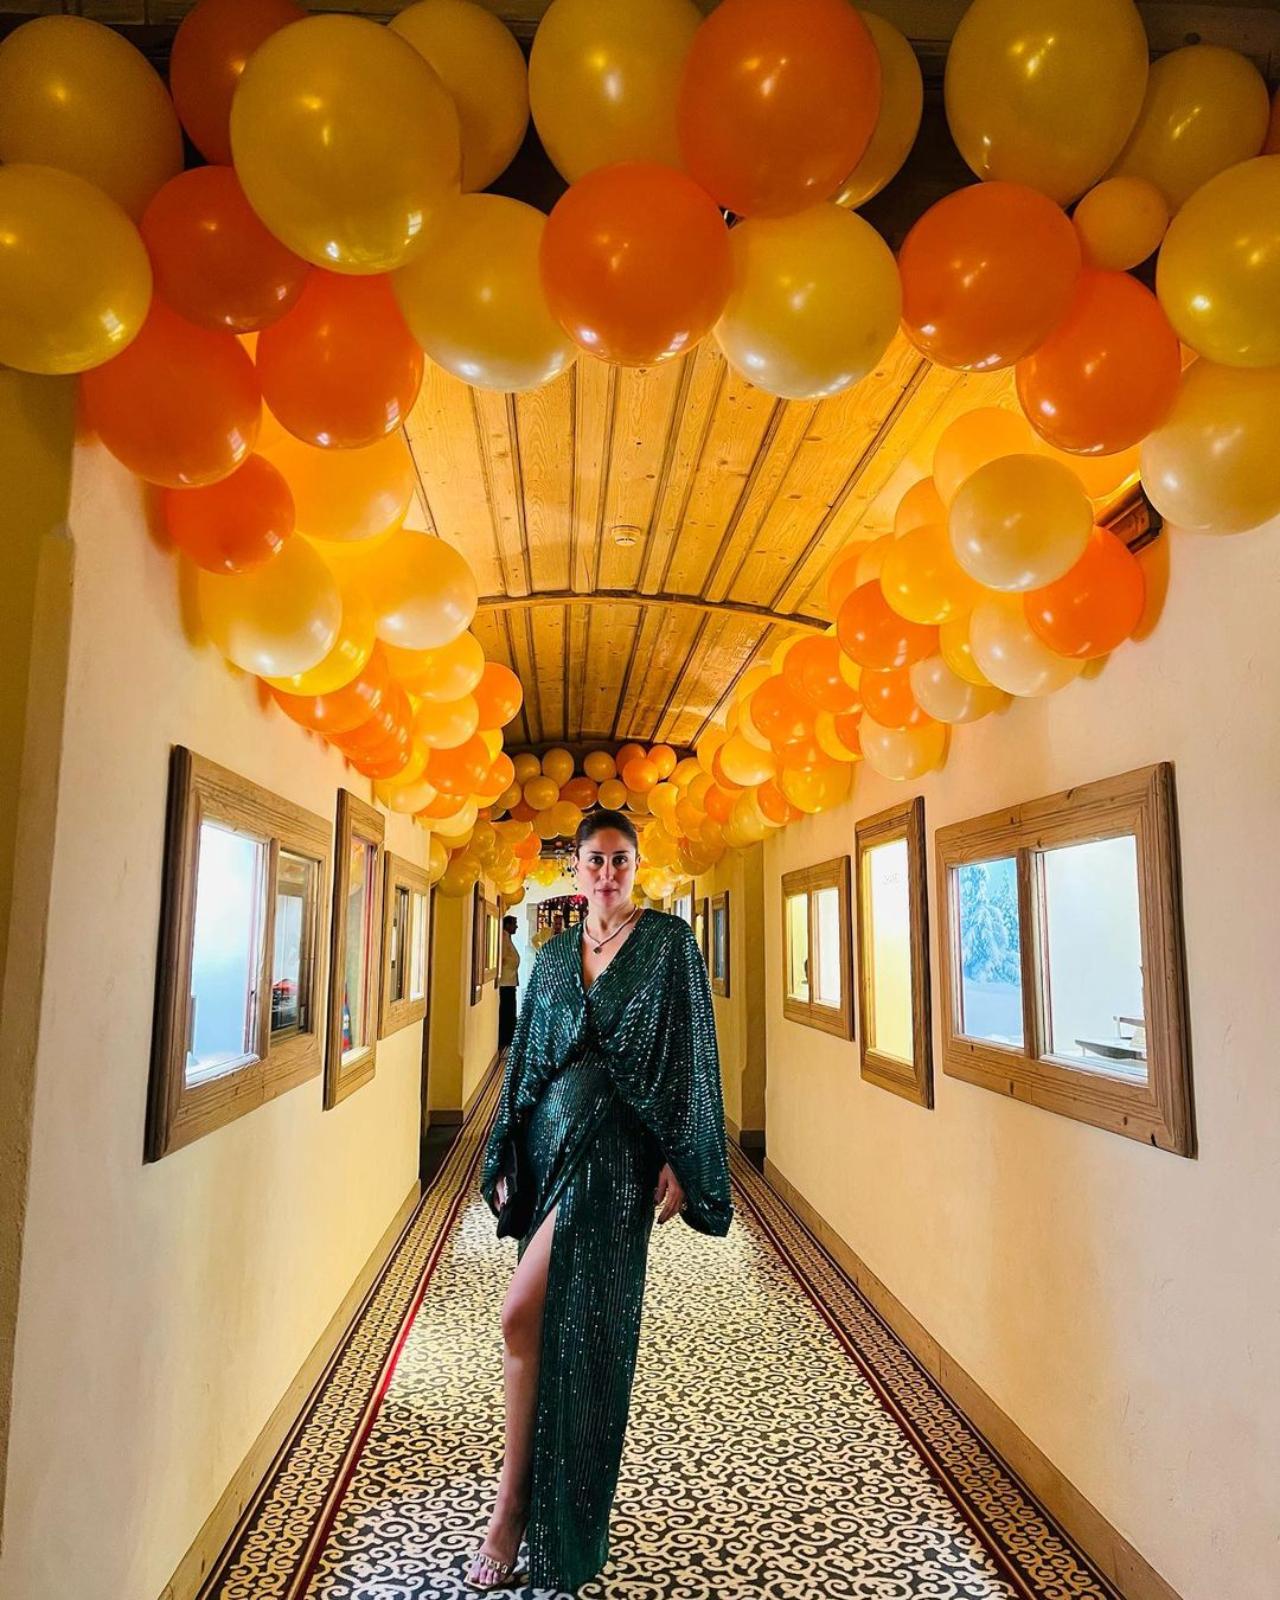 Kareena Kapoor looked absolutely stunning in her New Year's eve outfit. The actress donned a glittery green gown with a deep neck. She took to her Instagram handle to share pictures of her posing in her outfit. She is seen posing in a room decorated with yellow balloons on the ceiling